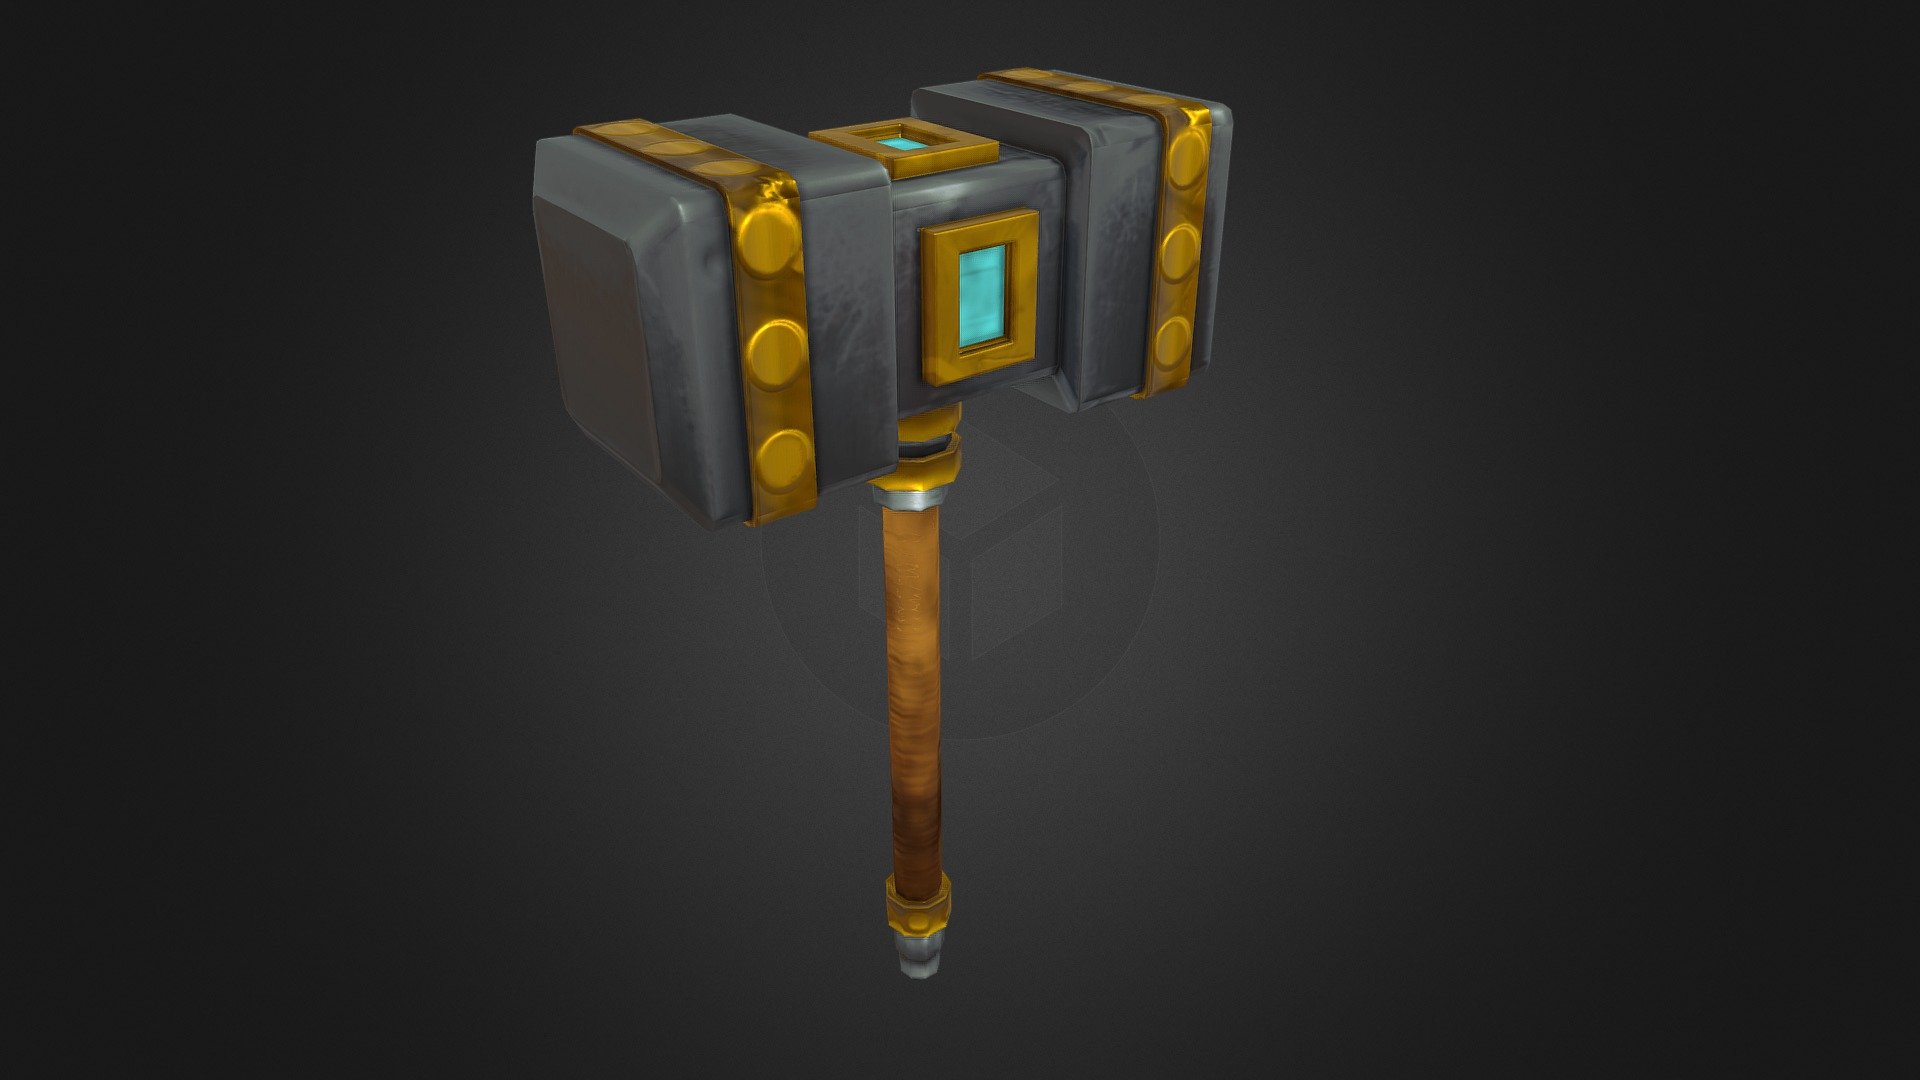 This cartoon hammer was made in blender, details were added in ZBrush and hand-paint texture was made in Substance Painter 2.
https://www.artstation.com/artwork/WeOzE - Cartoon hammer - 3D model by NaN_4aki (@NaN4aki) 3d model